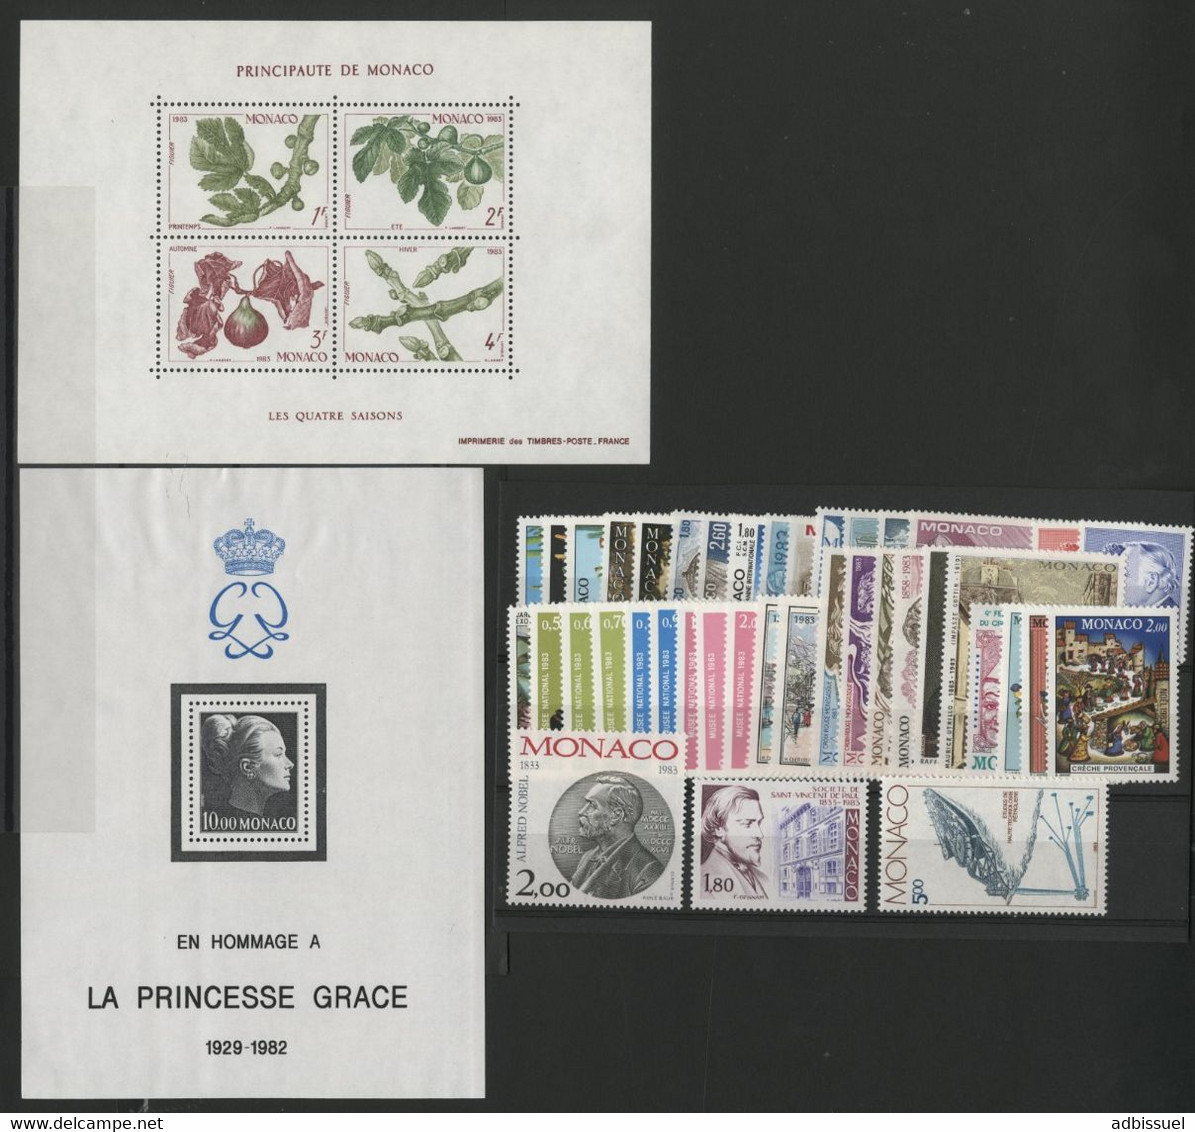 MONACO ANNEE COMPLETE 1983 COTE 119 € NEUFS ** (MNH) N° 1359 à 1403 Soit 45 Timbres. TB - Años Completos